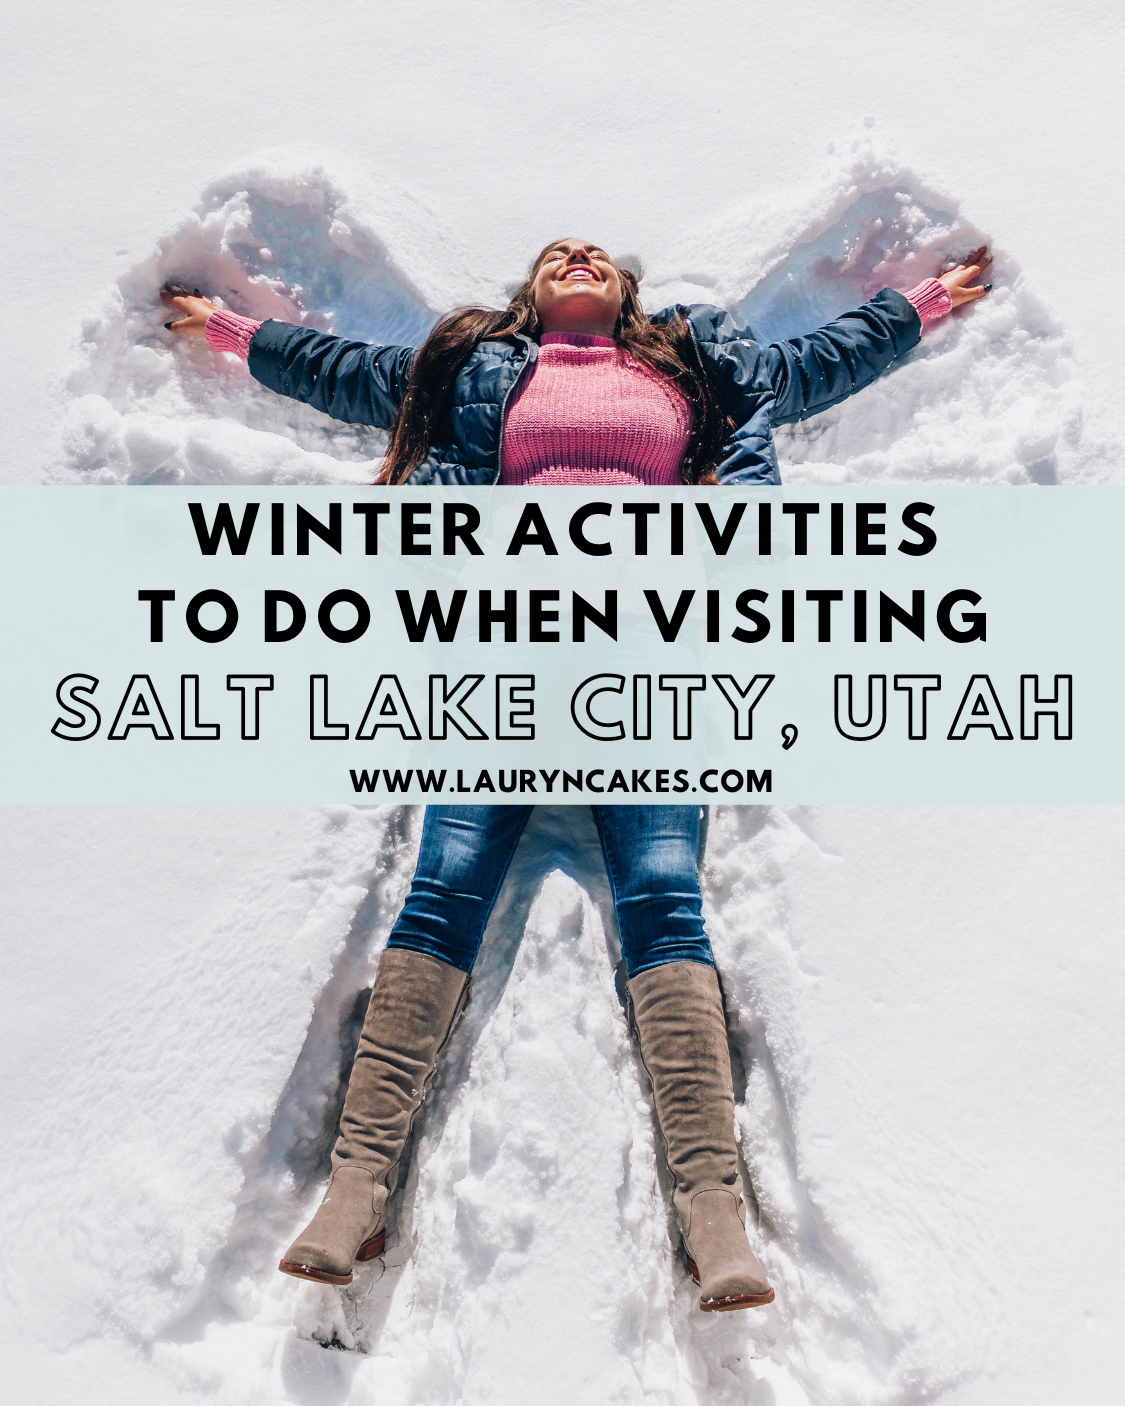 Photo of woman in snow with writing that says "winter activities to do when visiting Salt Lake City, Utah www.lauryncakes.com"